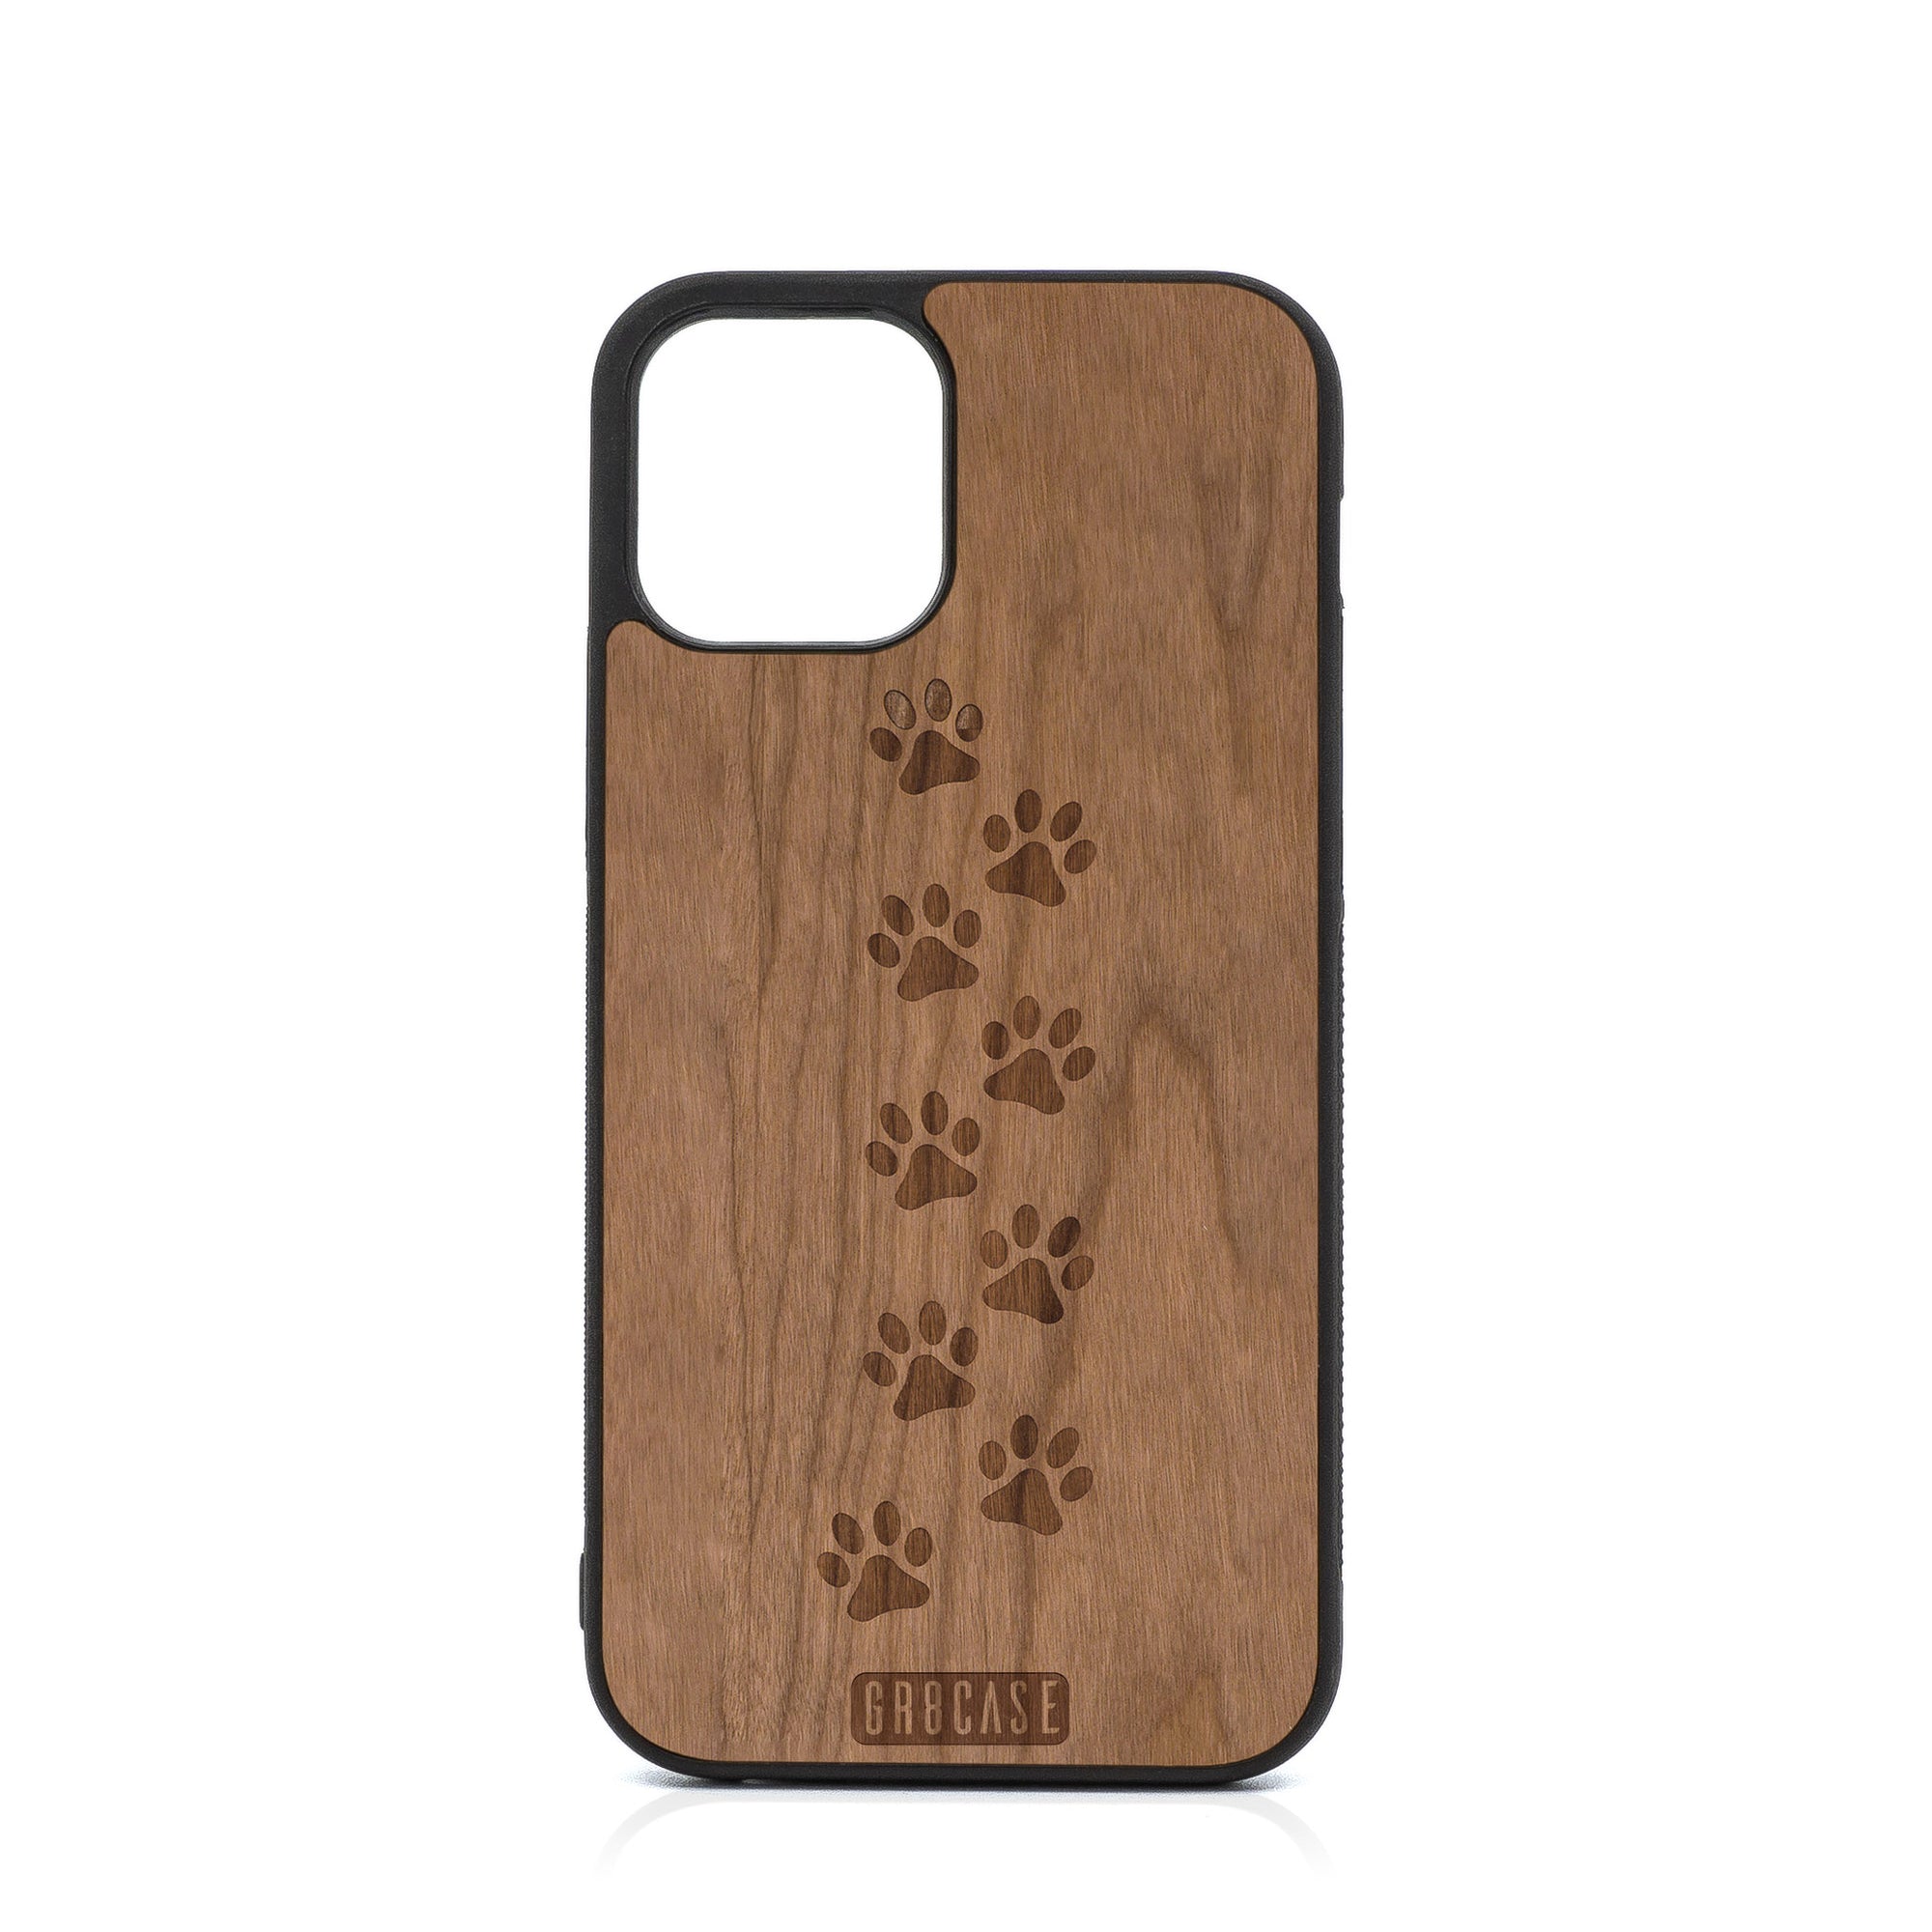 Paw Prints Design Wood Case For iPhone 12 Pro